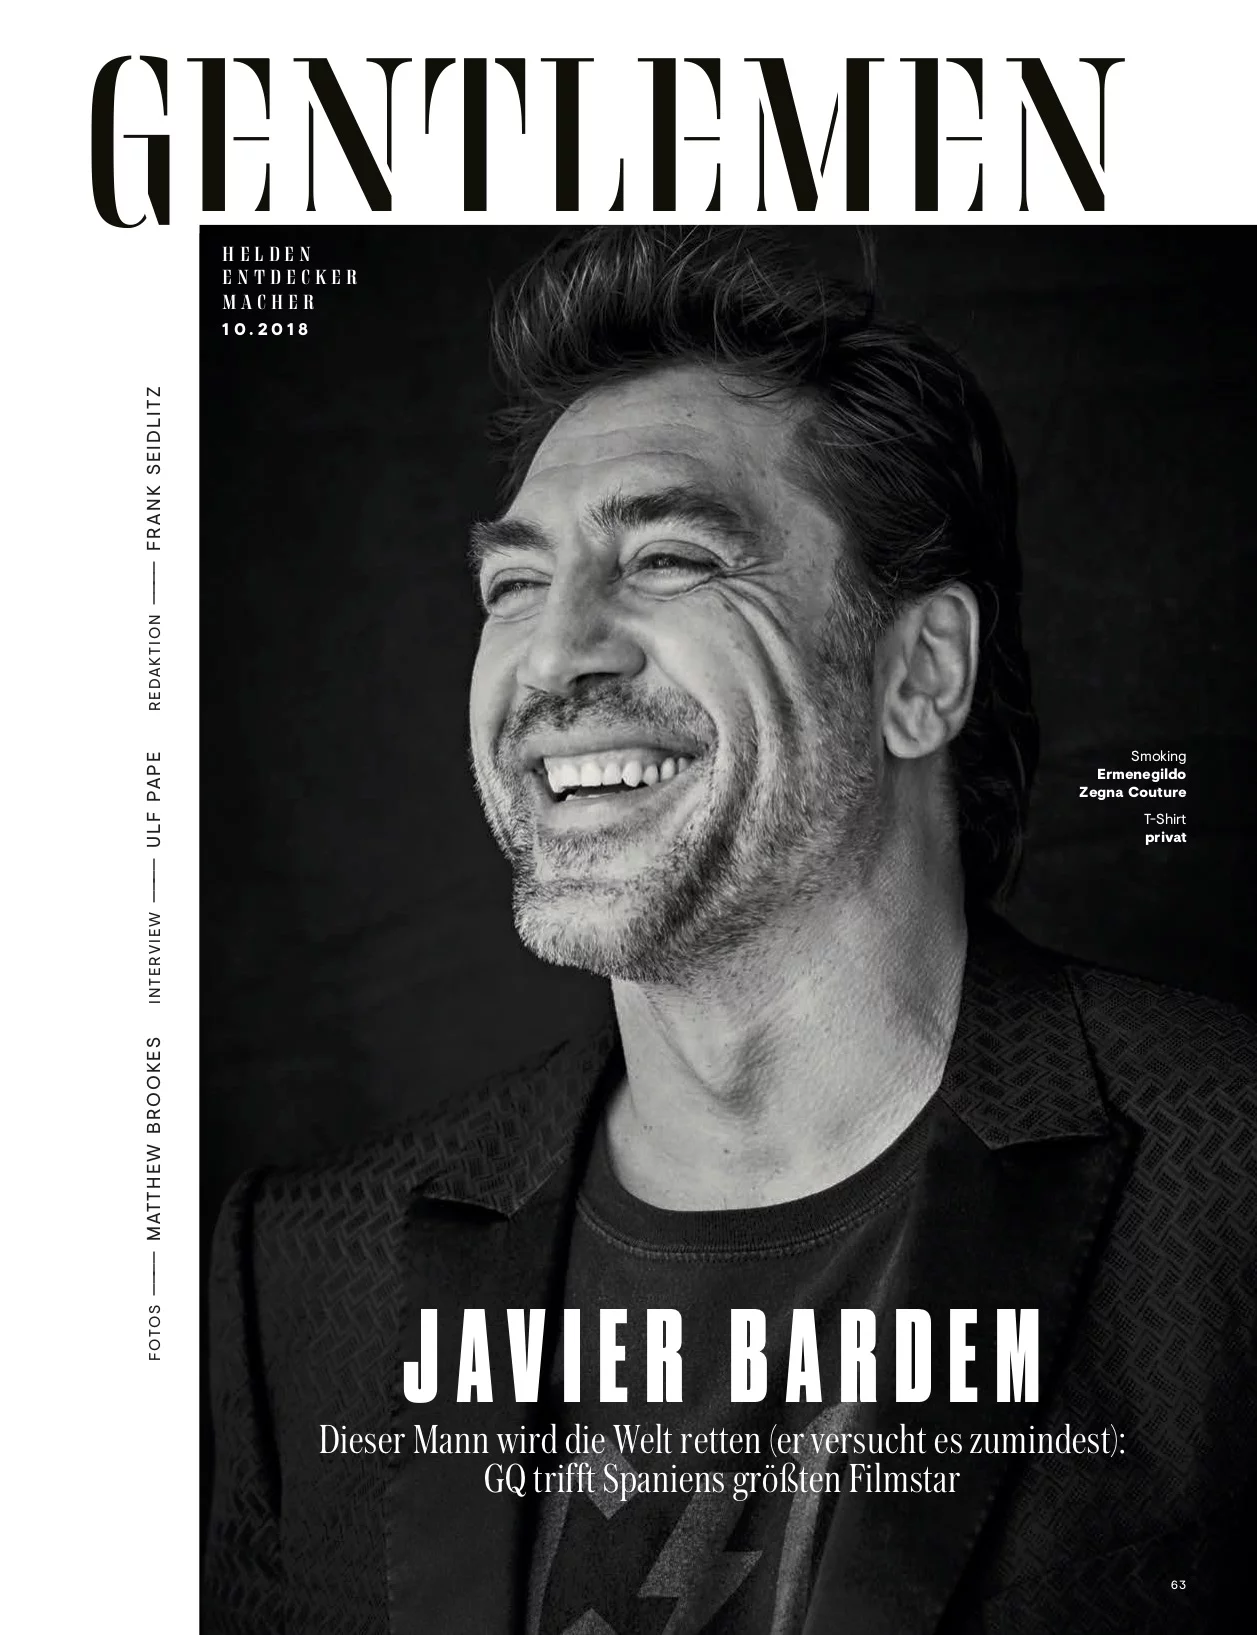 GQ with Javier Bardem 2 by Claudia ENGLMANN